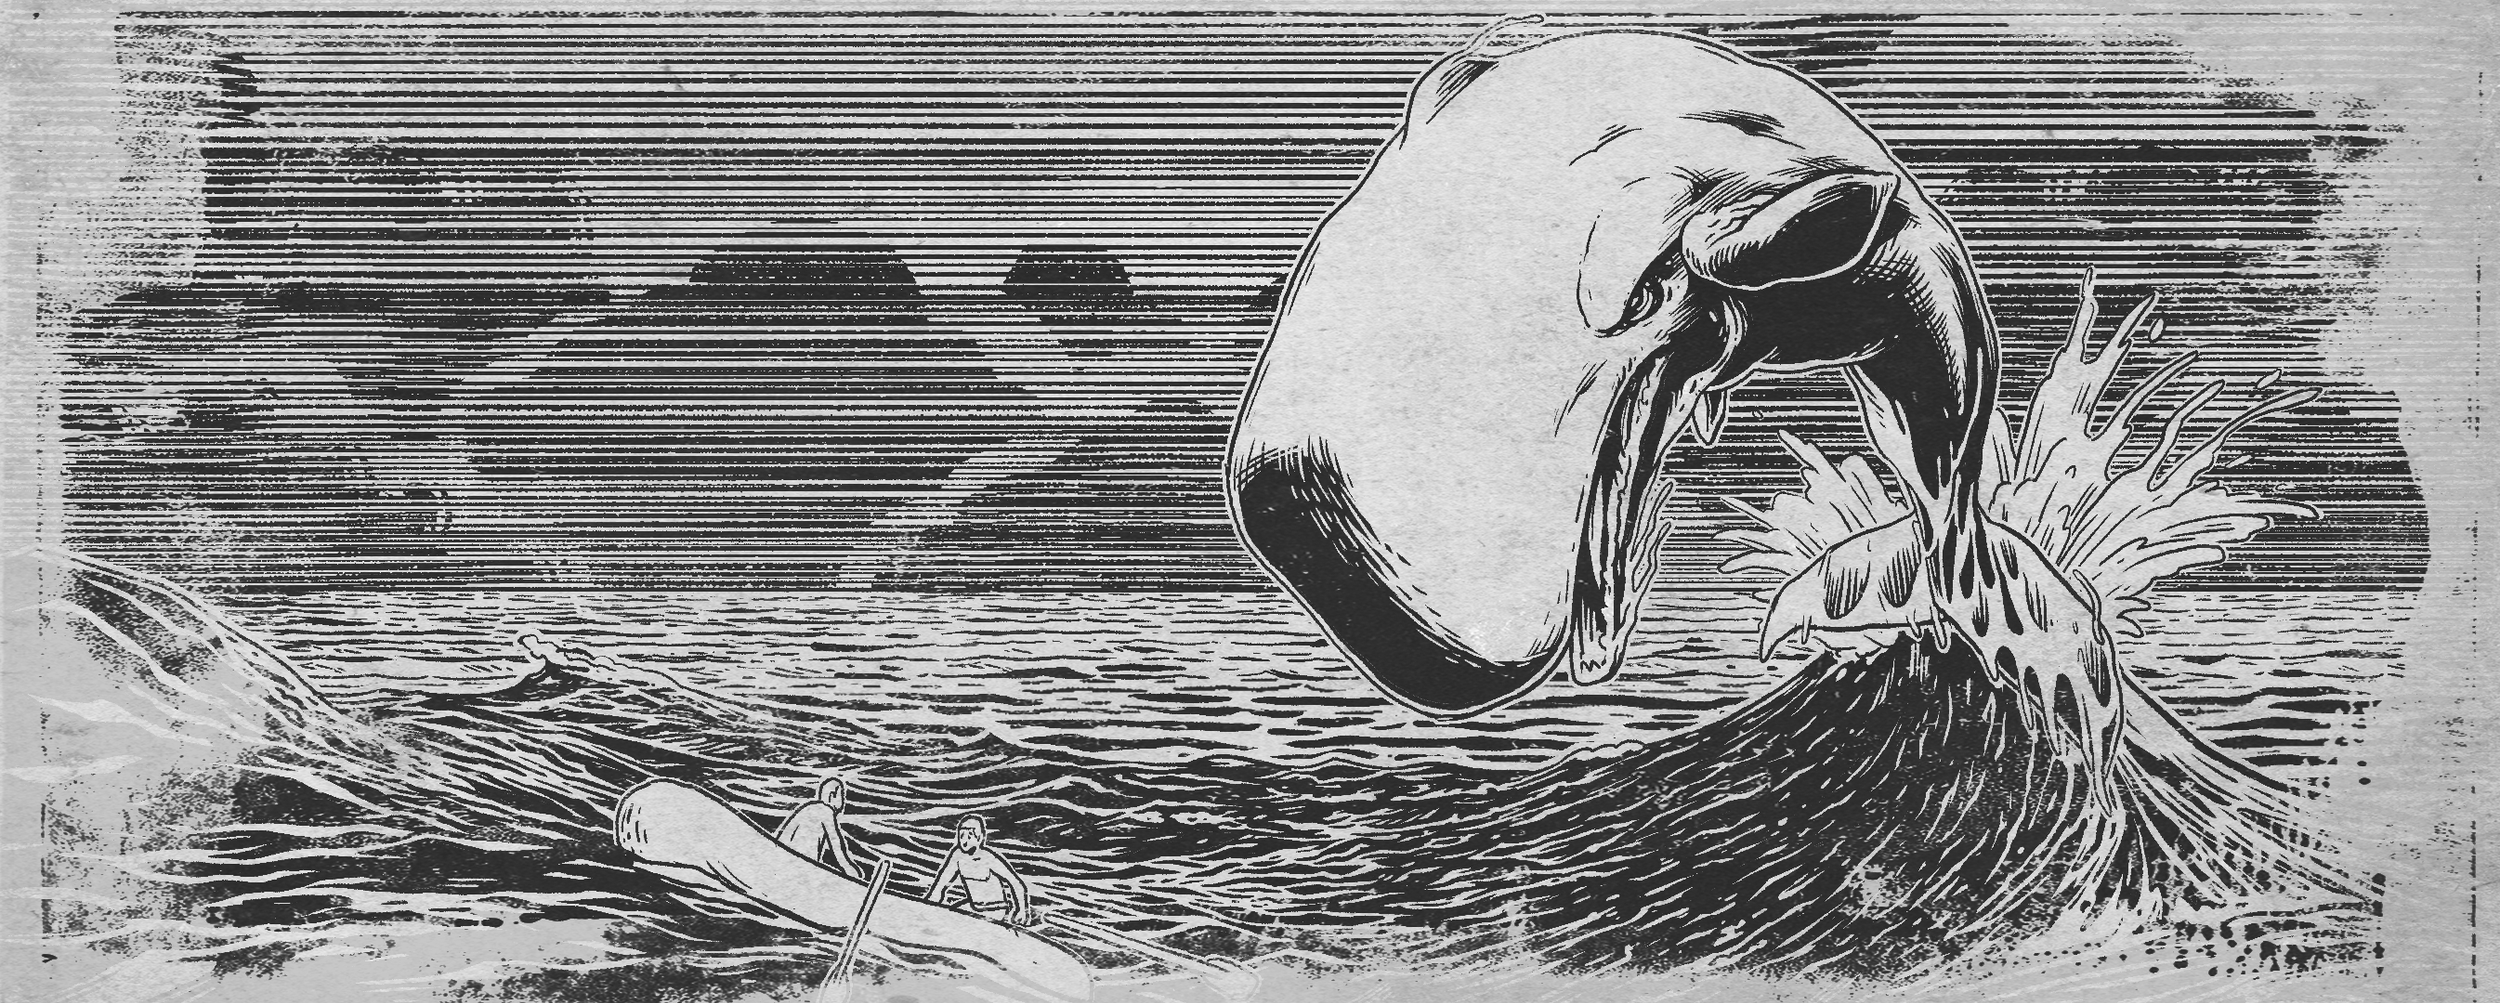 JB_illustrations_v0159A_-Whale-attack.png